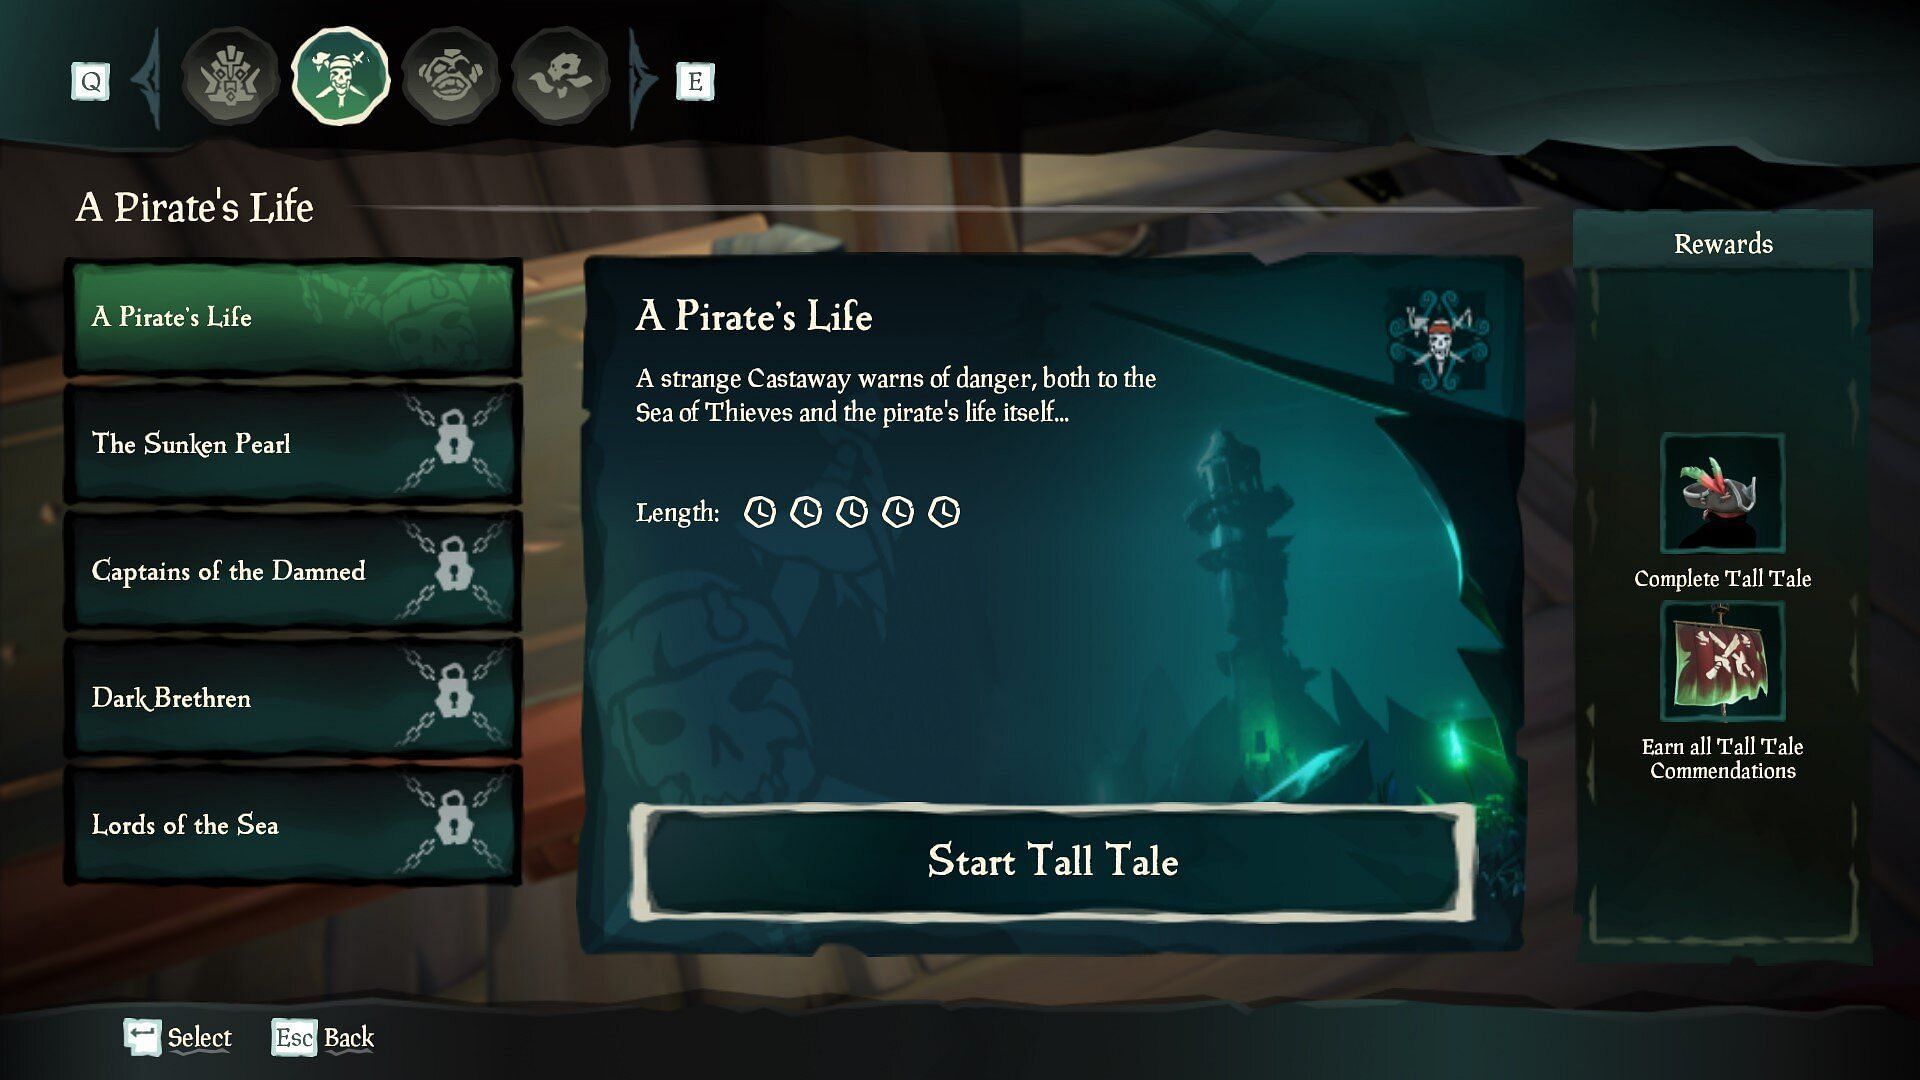 This tab lets players select one of 4 Tall Tales and shows them the rewards available. (Image via Rare)